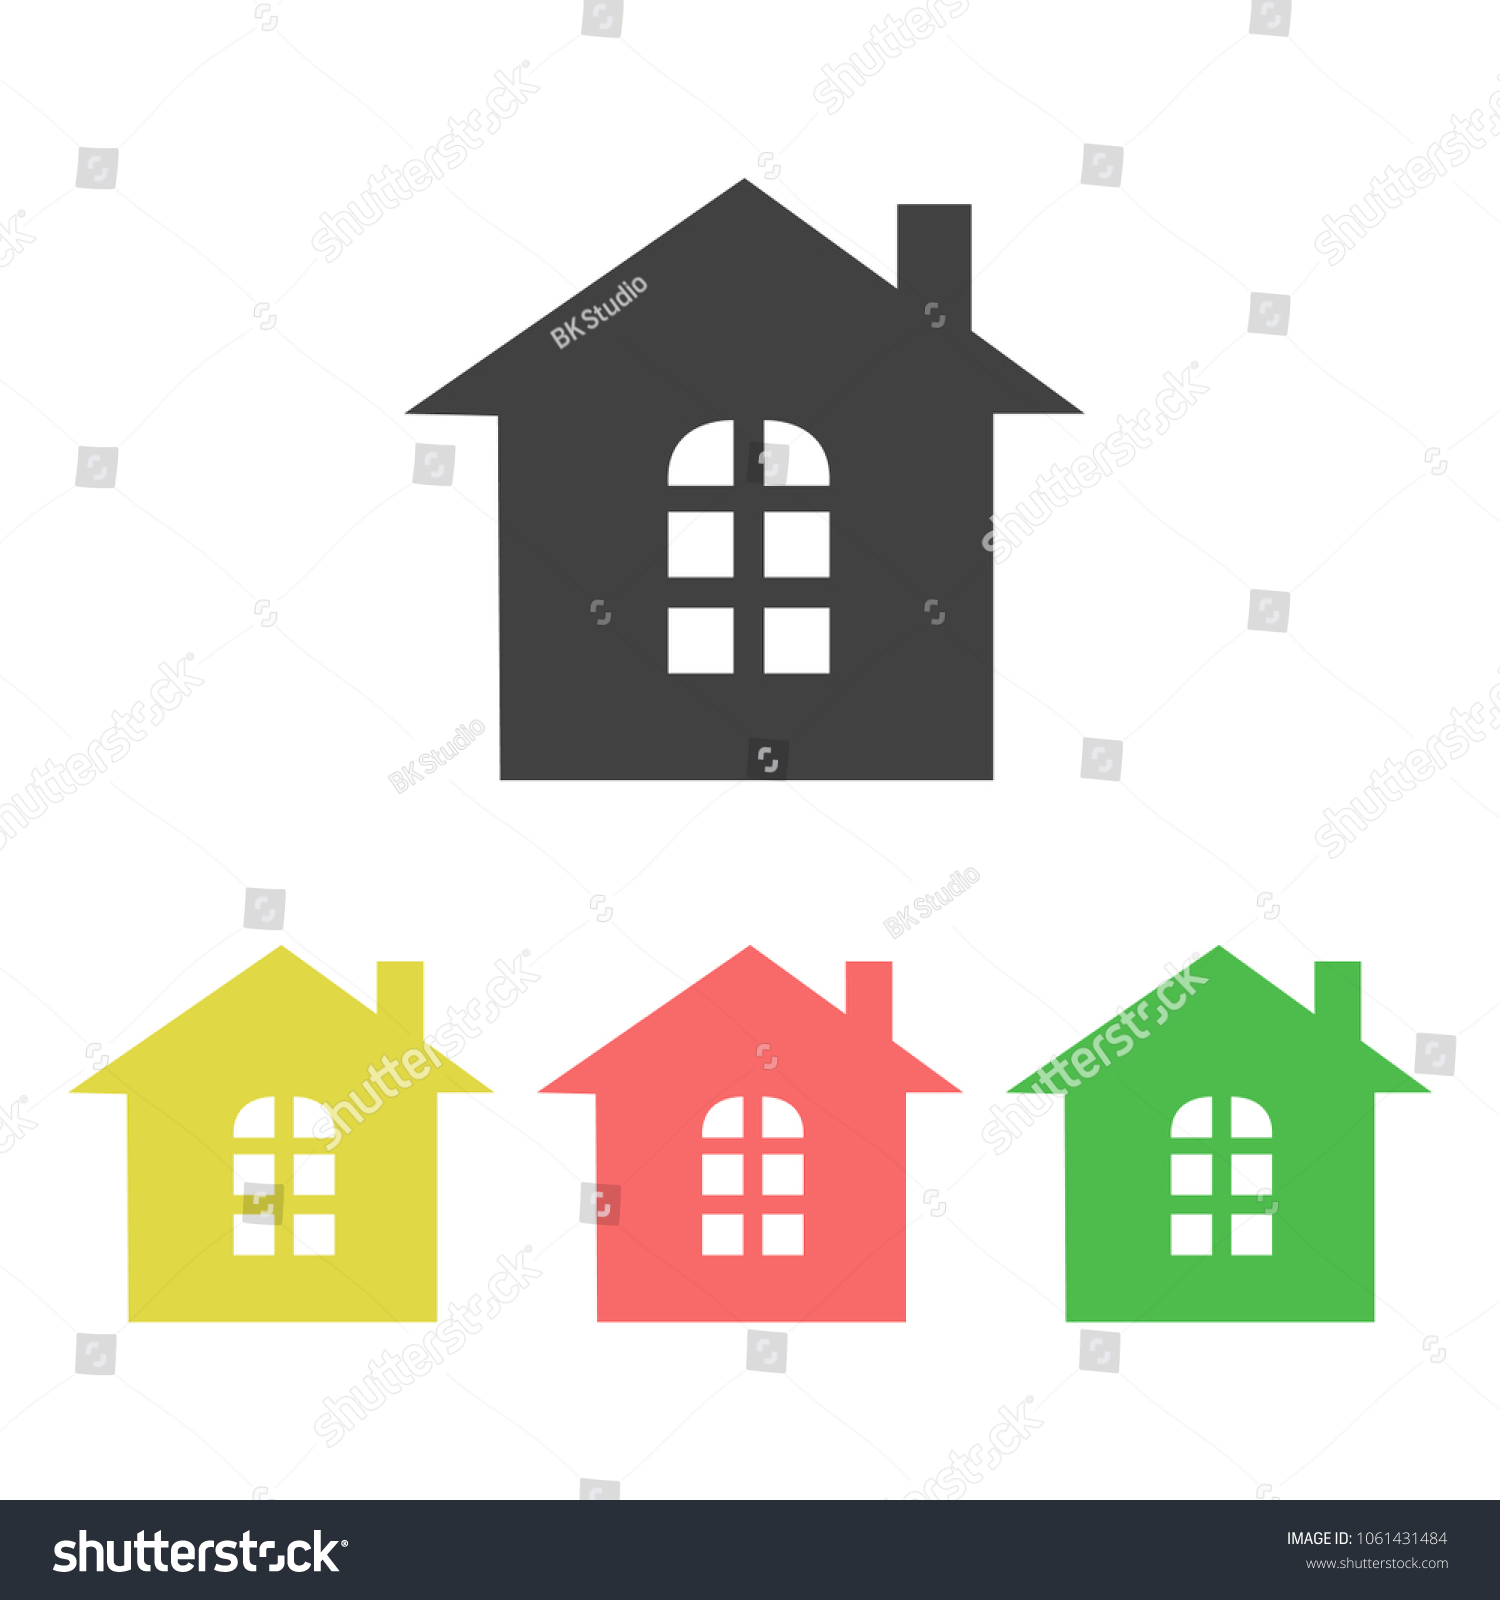 Home Icon Vector Set Stock Vector (Royalty Free) 1061431484 | Shutterstock